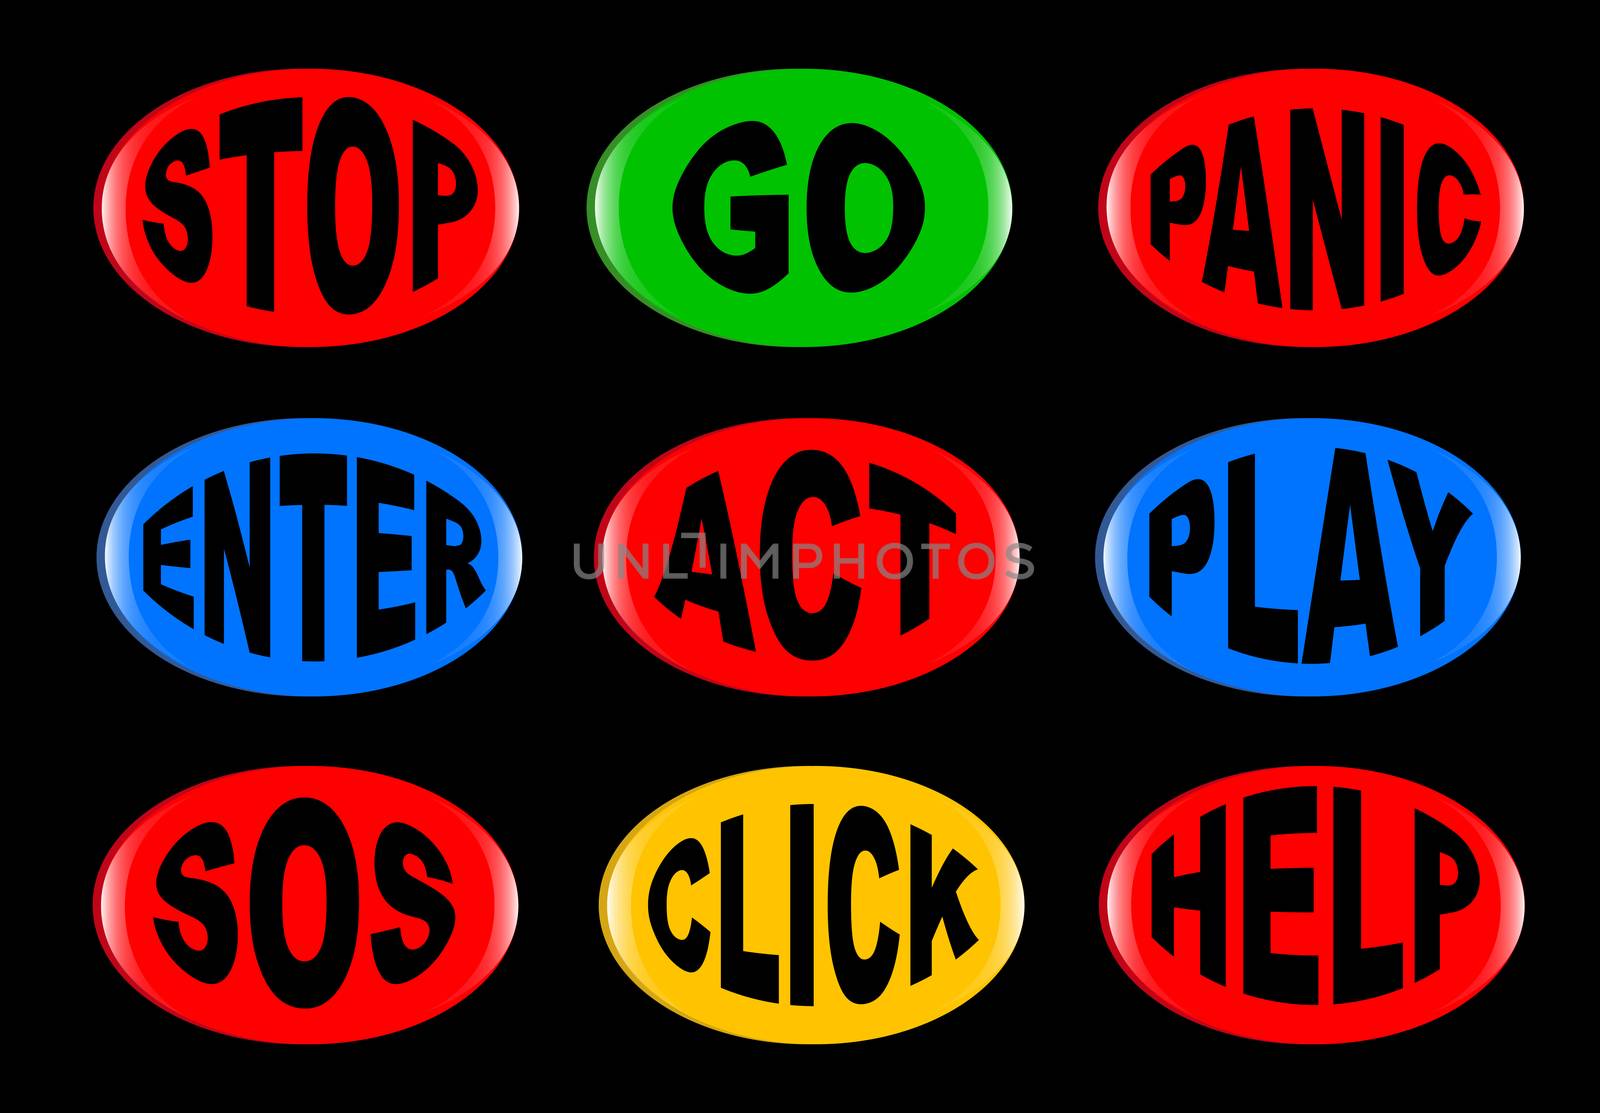 A collection of 3D buttons with various text instructions. Easy color change and resize.